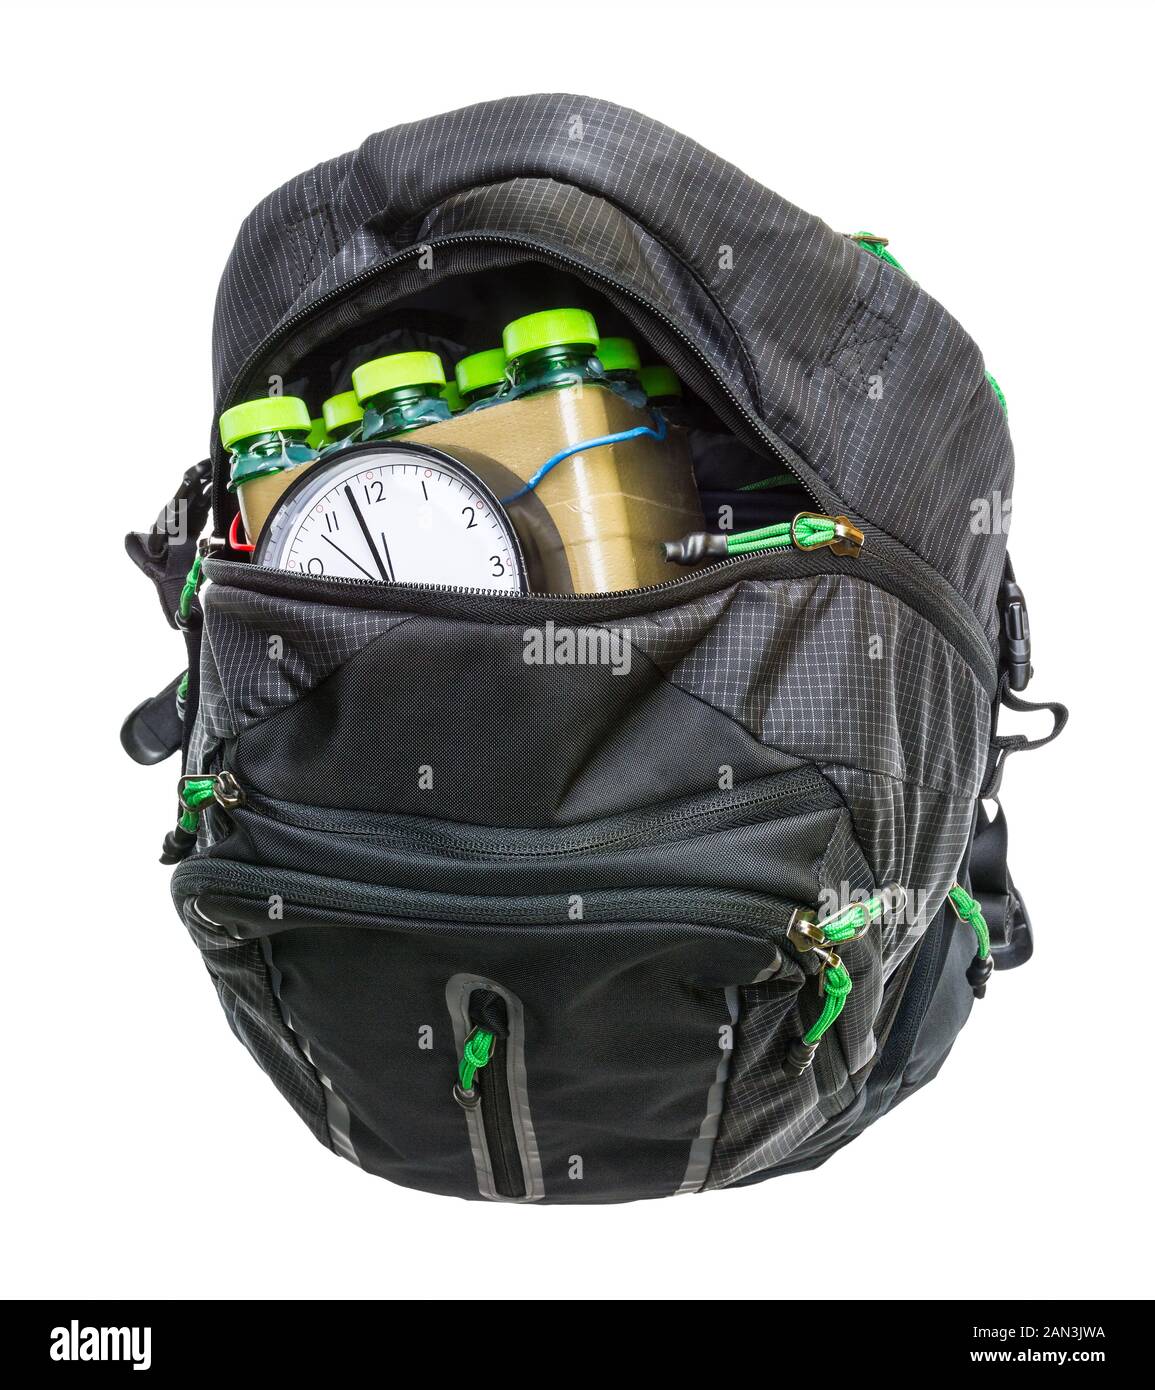 Time-bomb detail. Improvised explosive device in rucksack isolated on white background. Home-made timebomb inside of black baggage with open zipper. Stock Photo